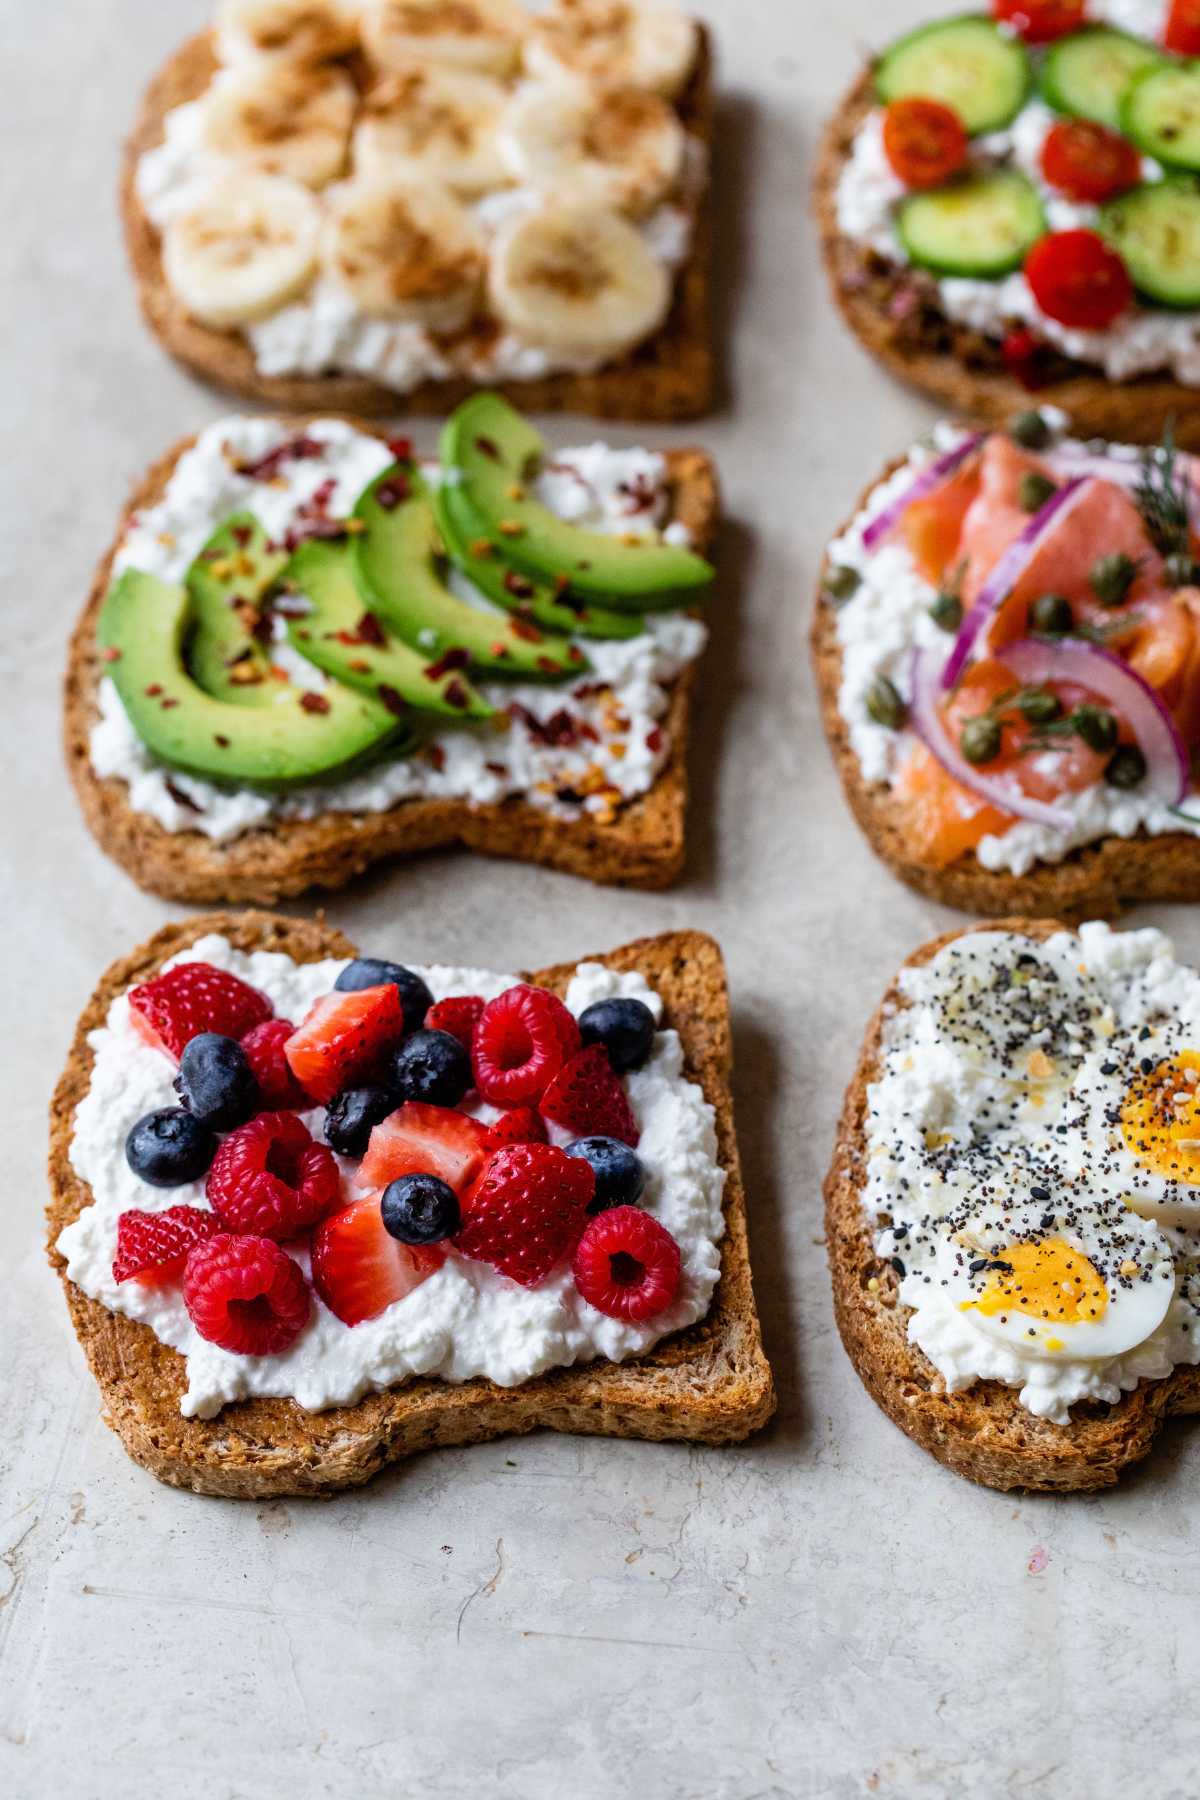 Toasts topped with cottage cheese and various other toppings.